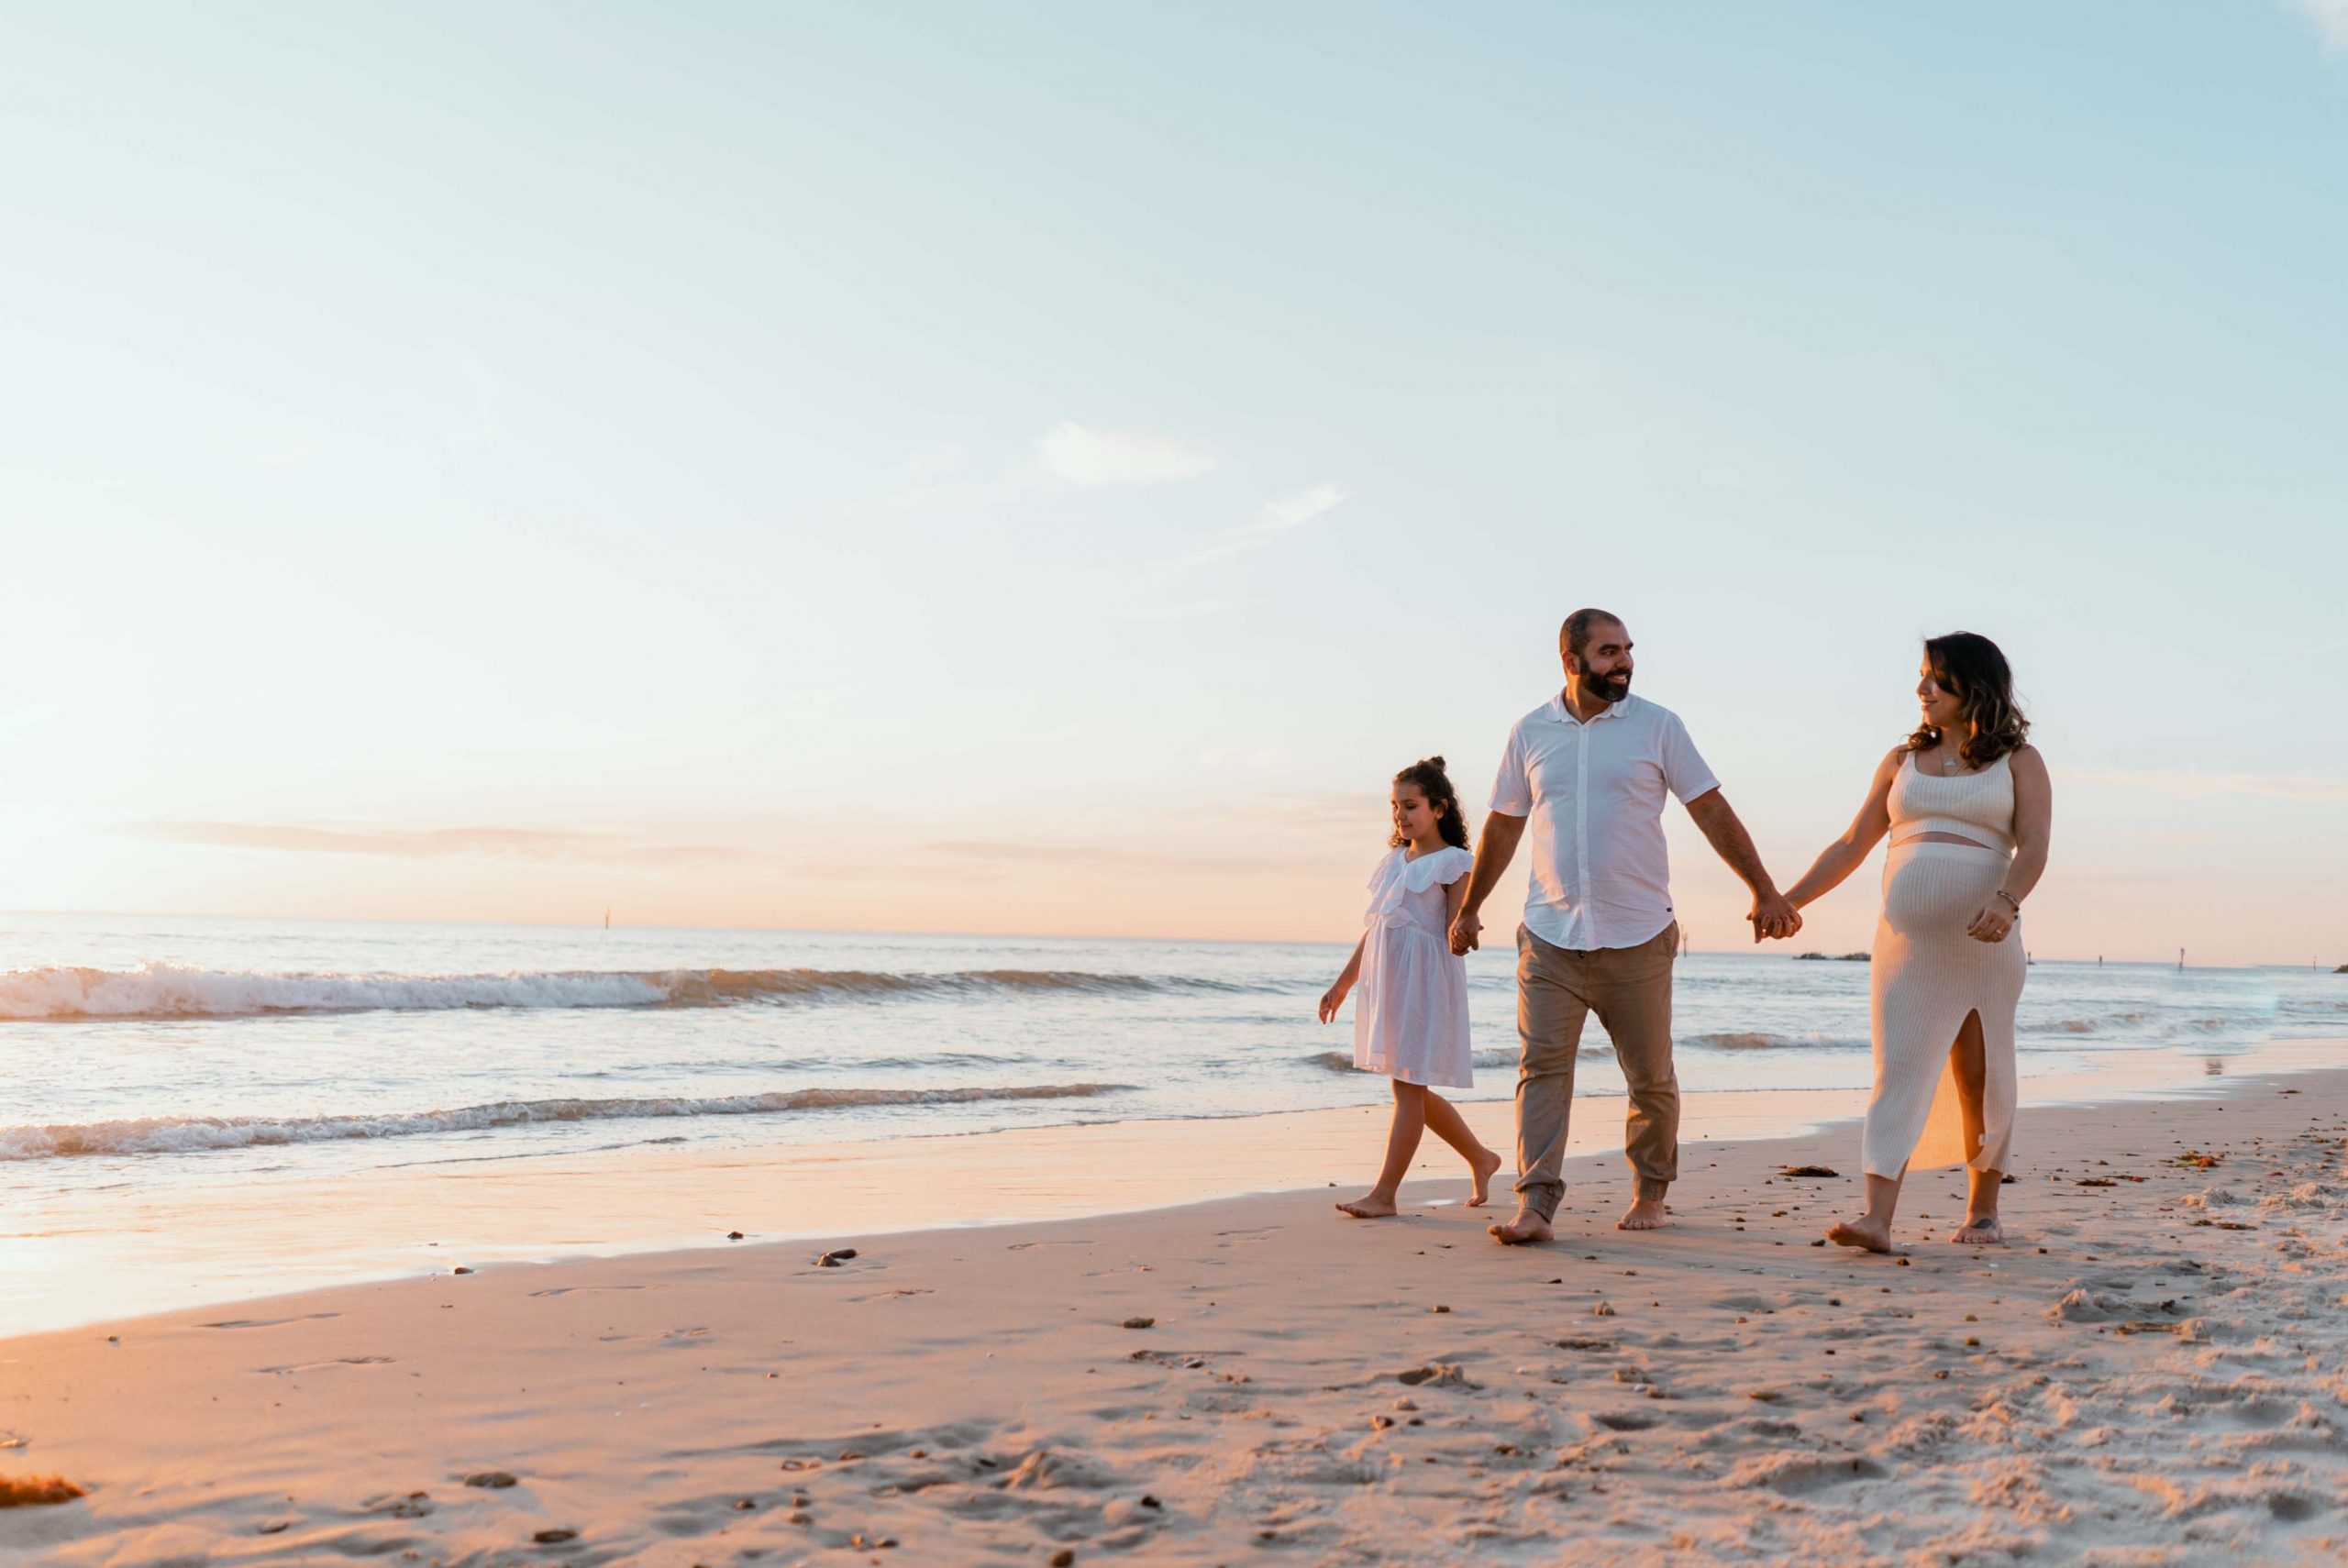 maternity films and photos: sunset time with family walking in the beach looking at each other and expecting their second child